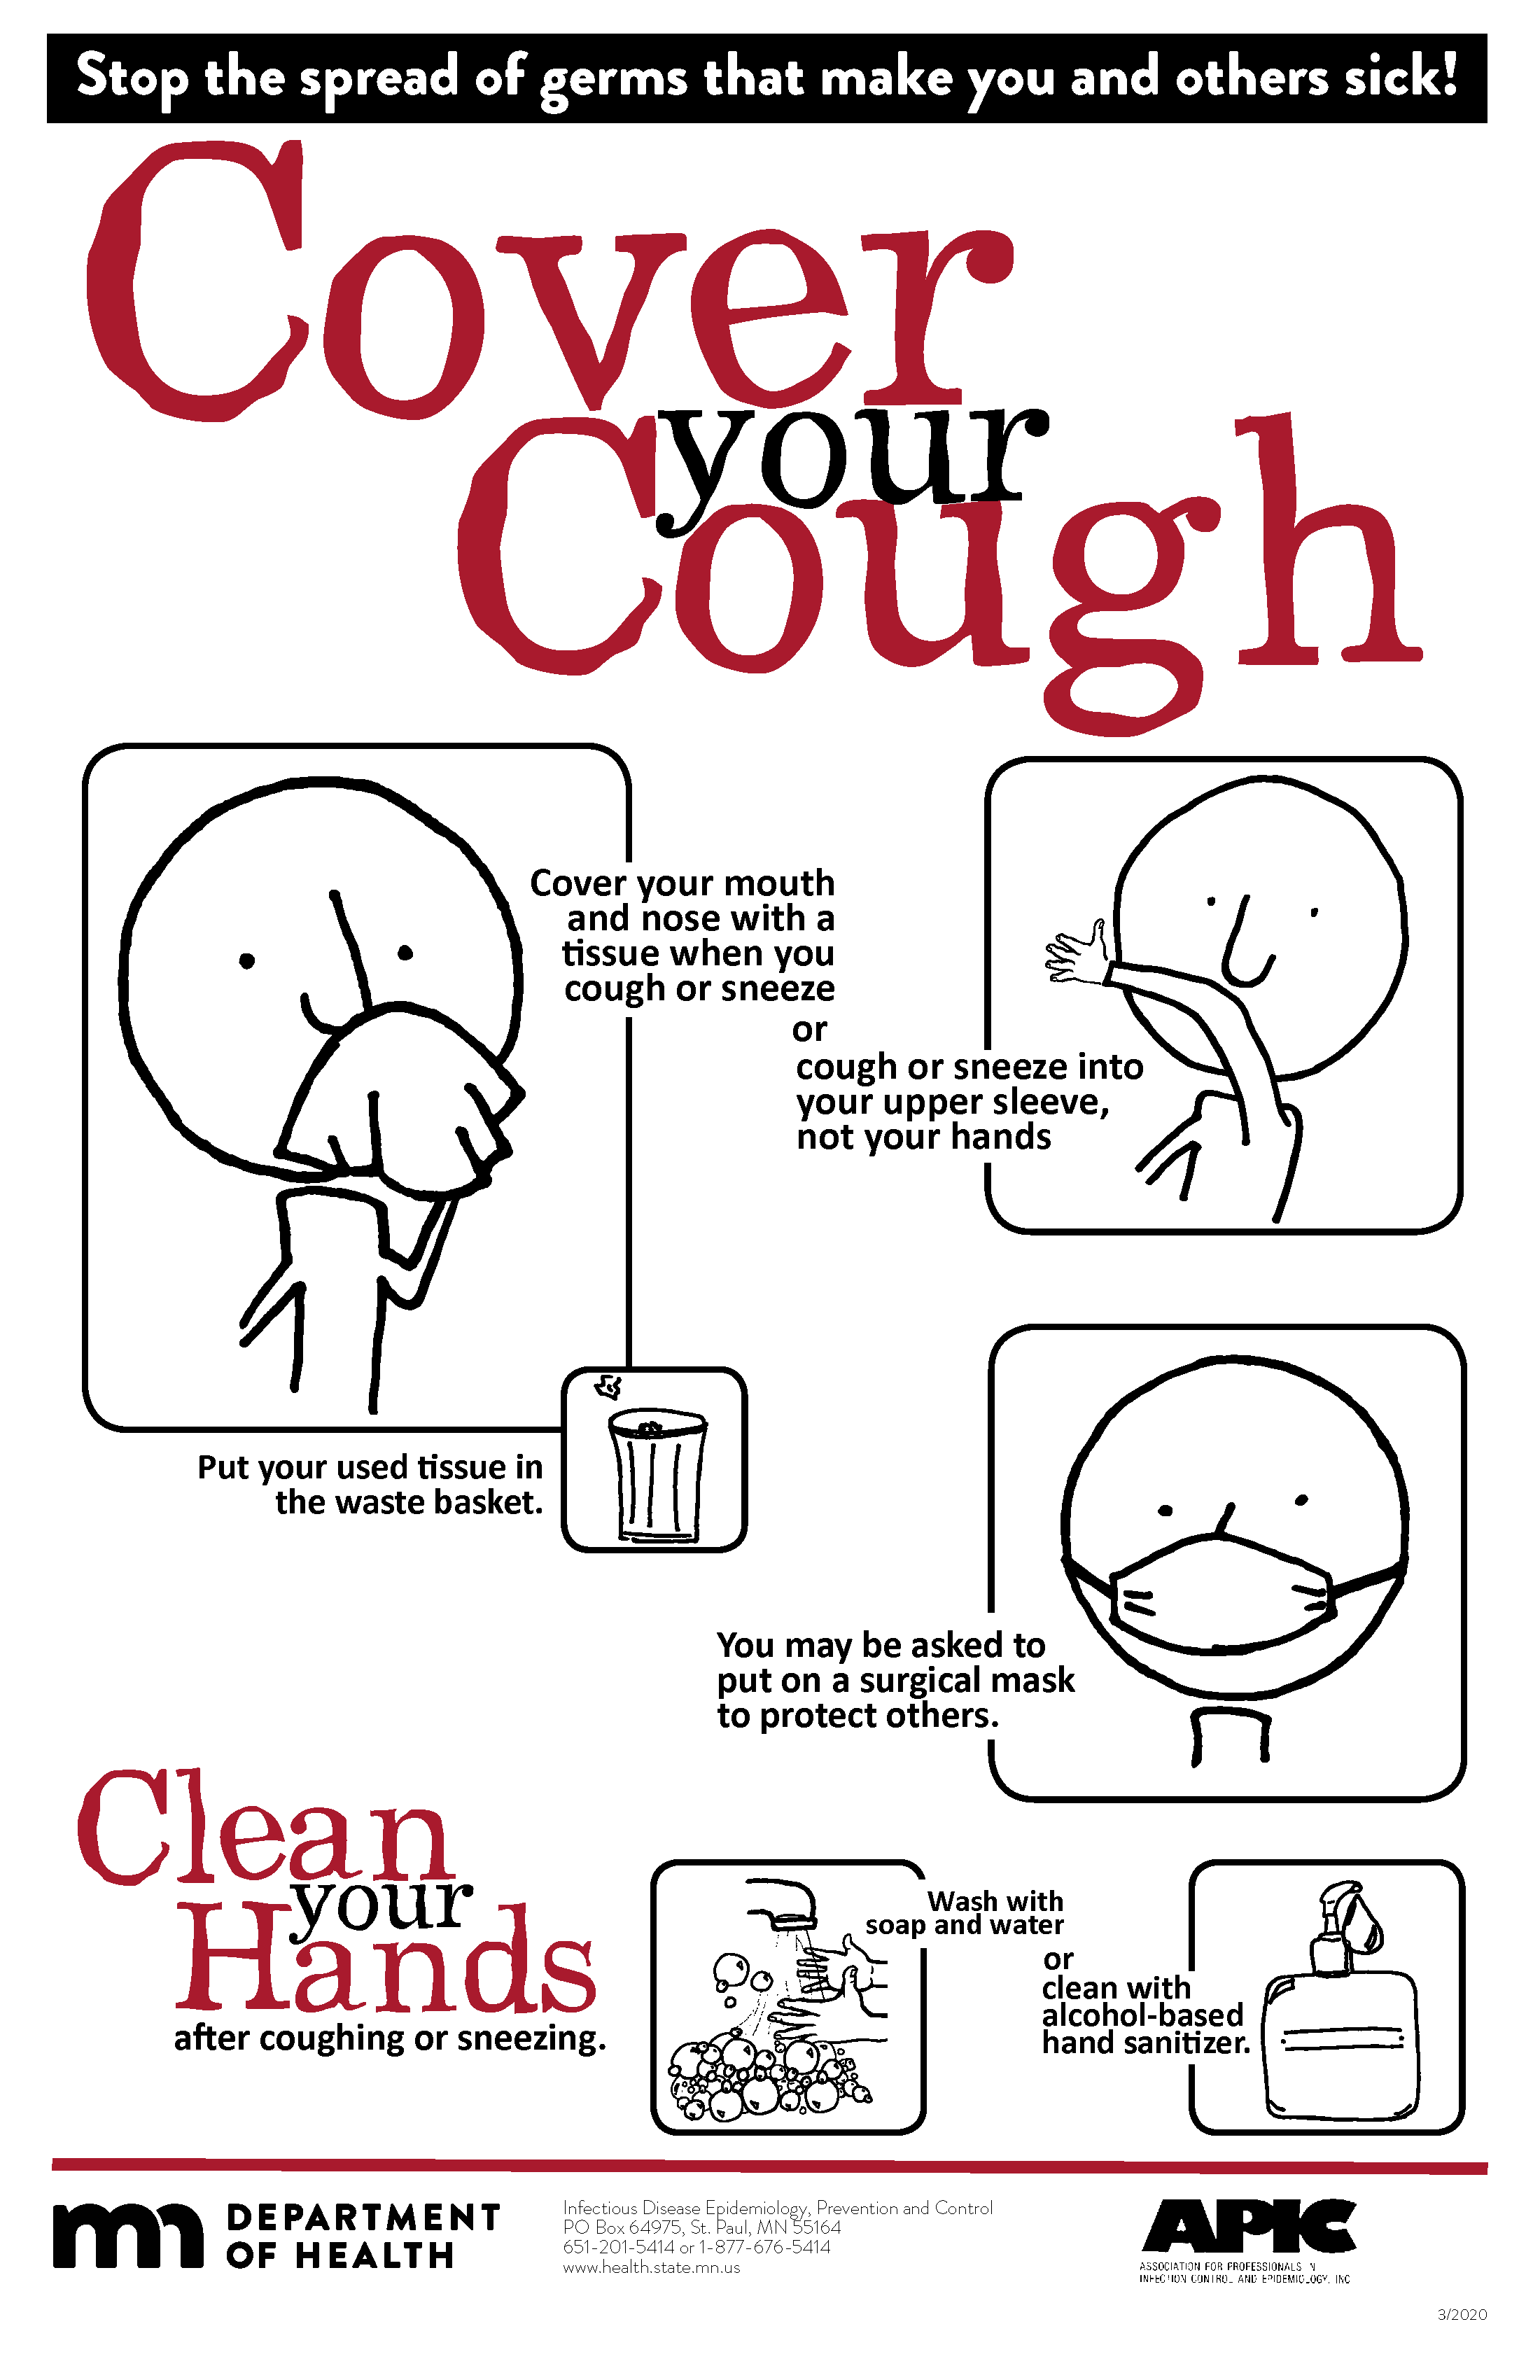 image of red cover your cough poster